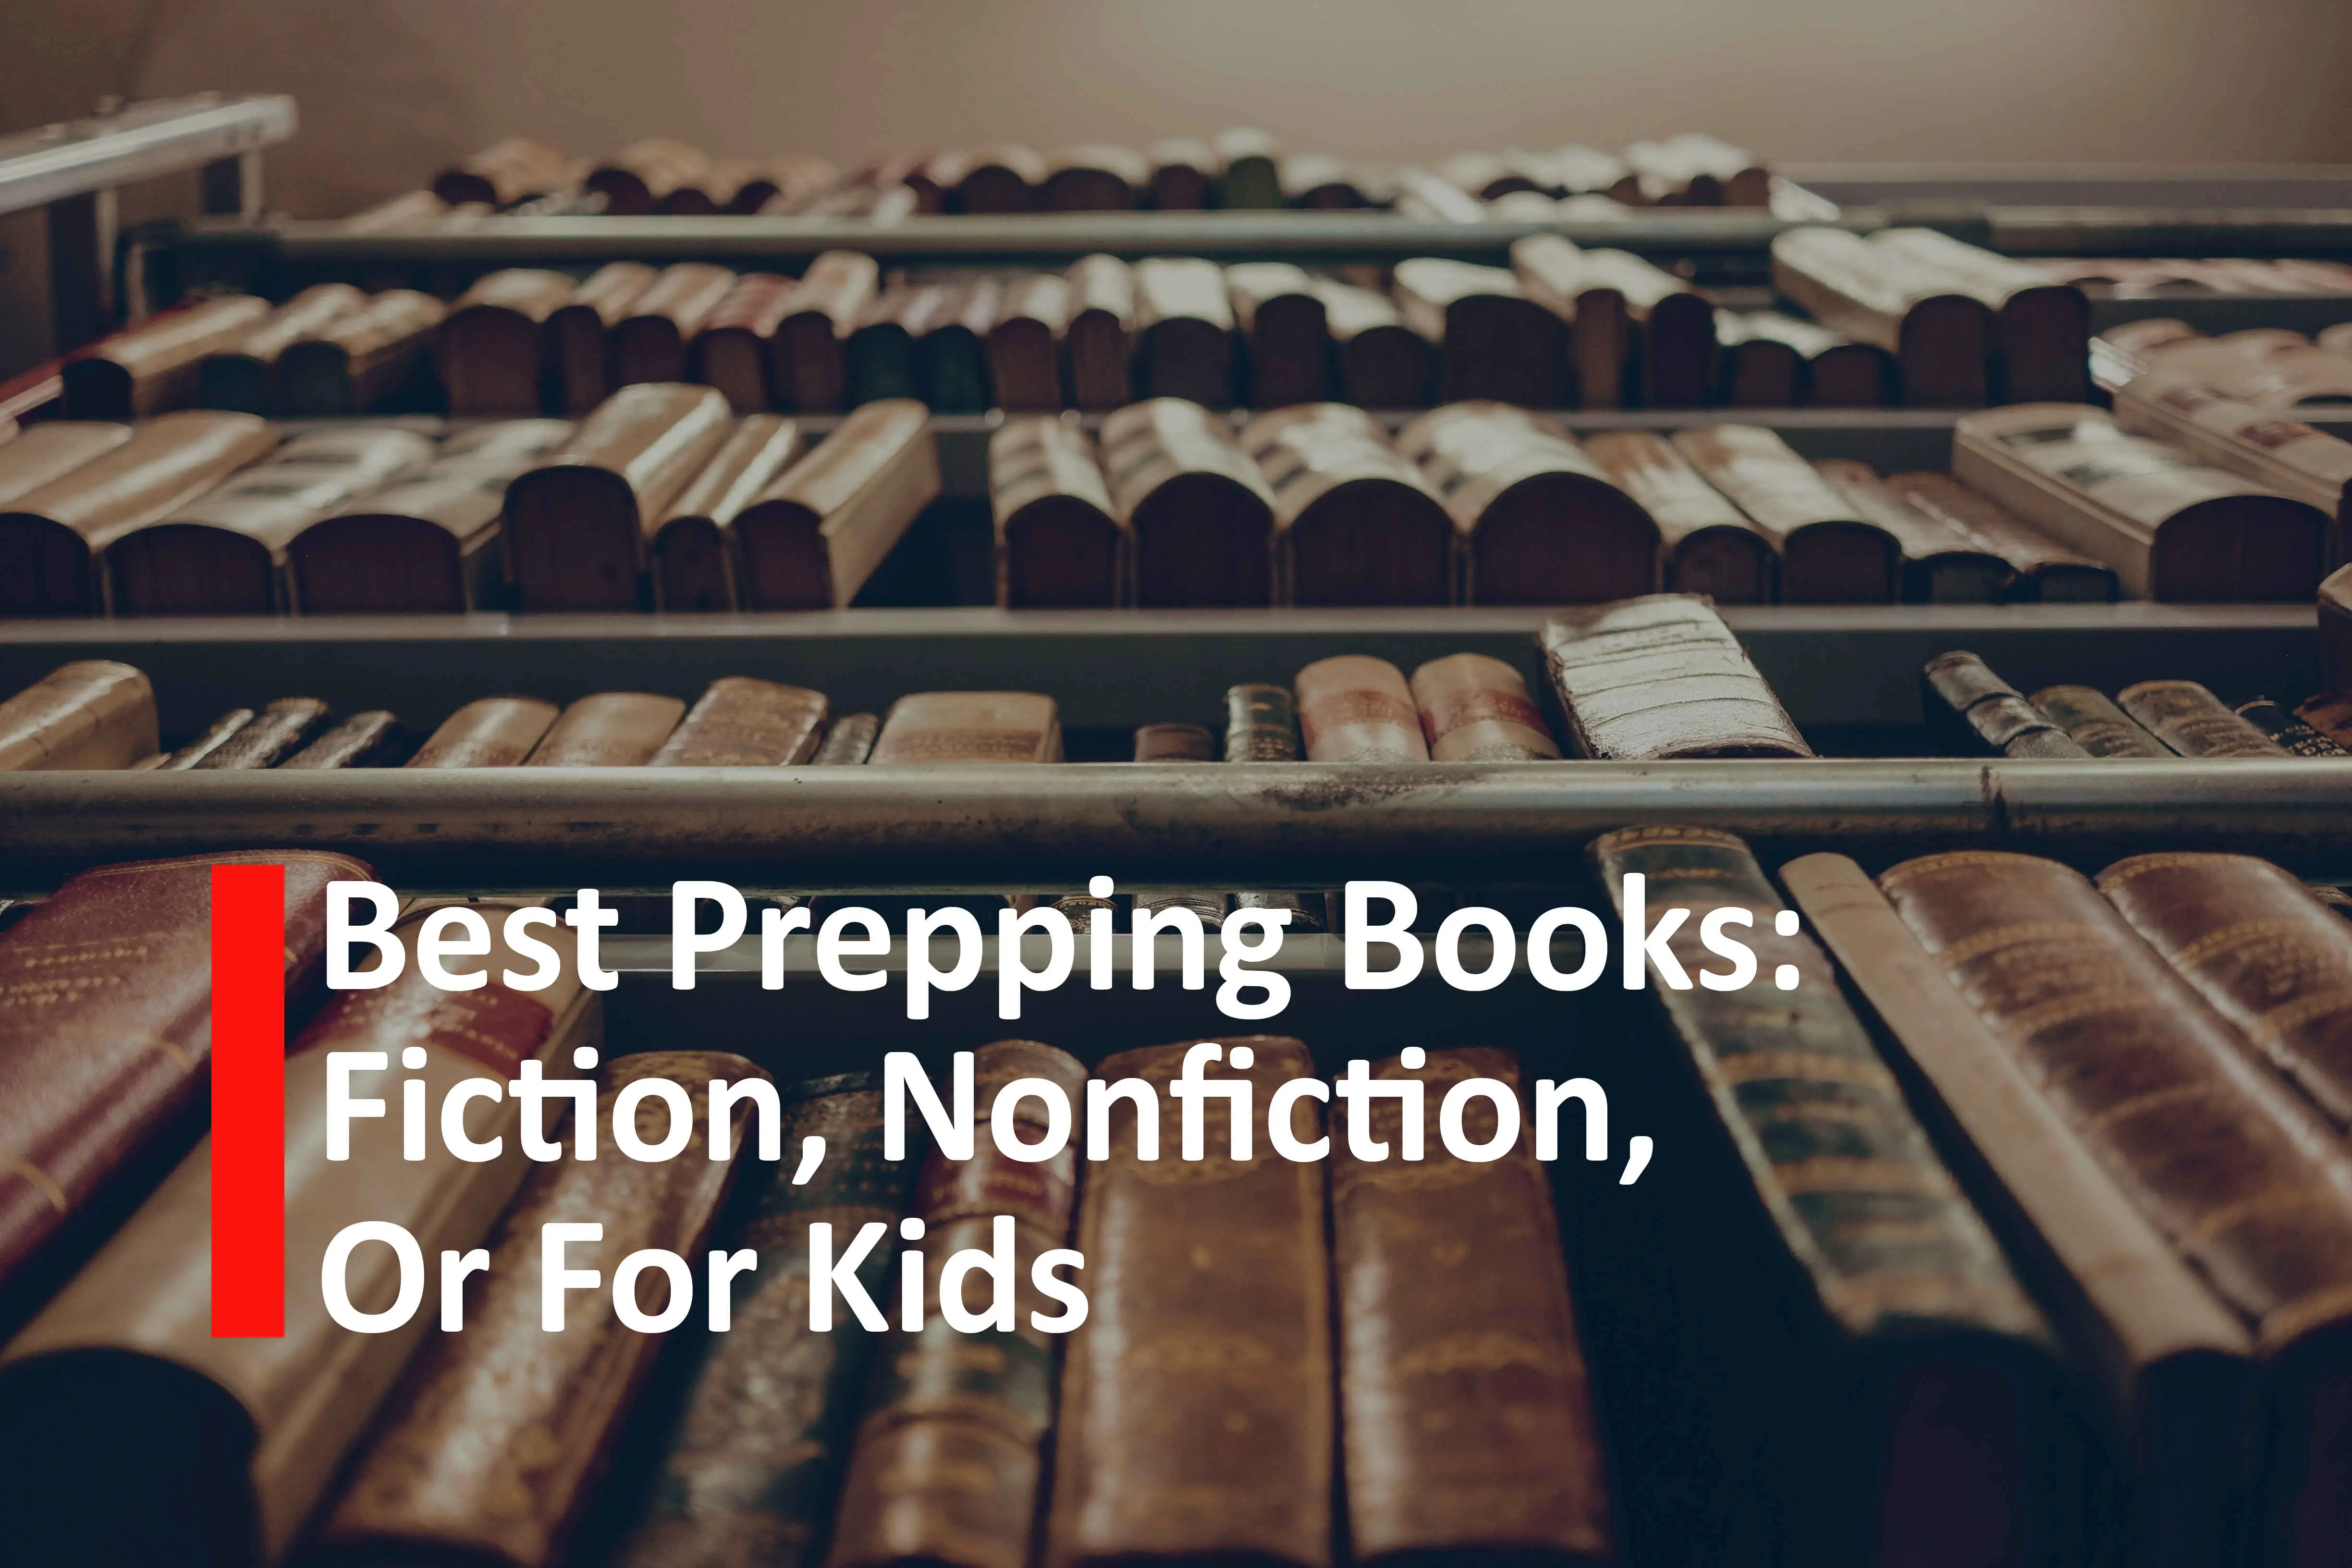 Best Prepping Books: Fiction, nonfiction, or for kids